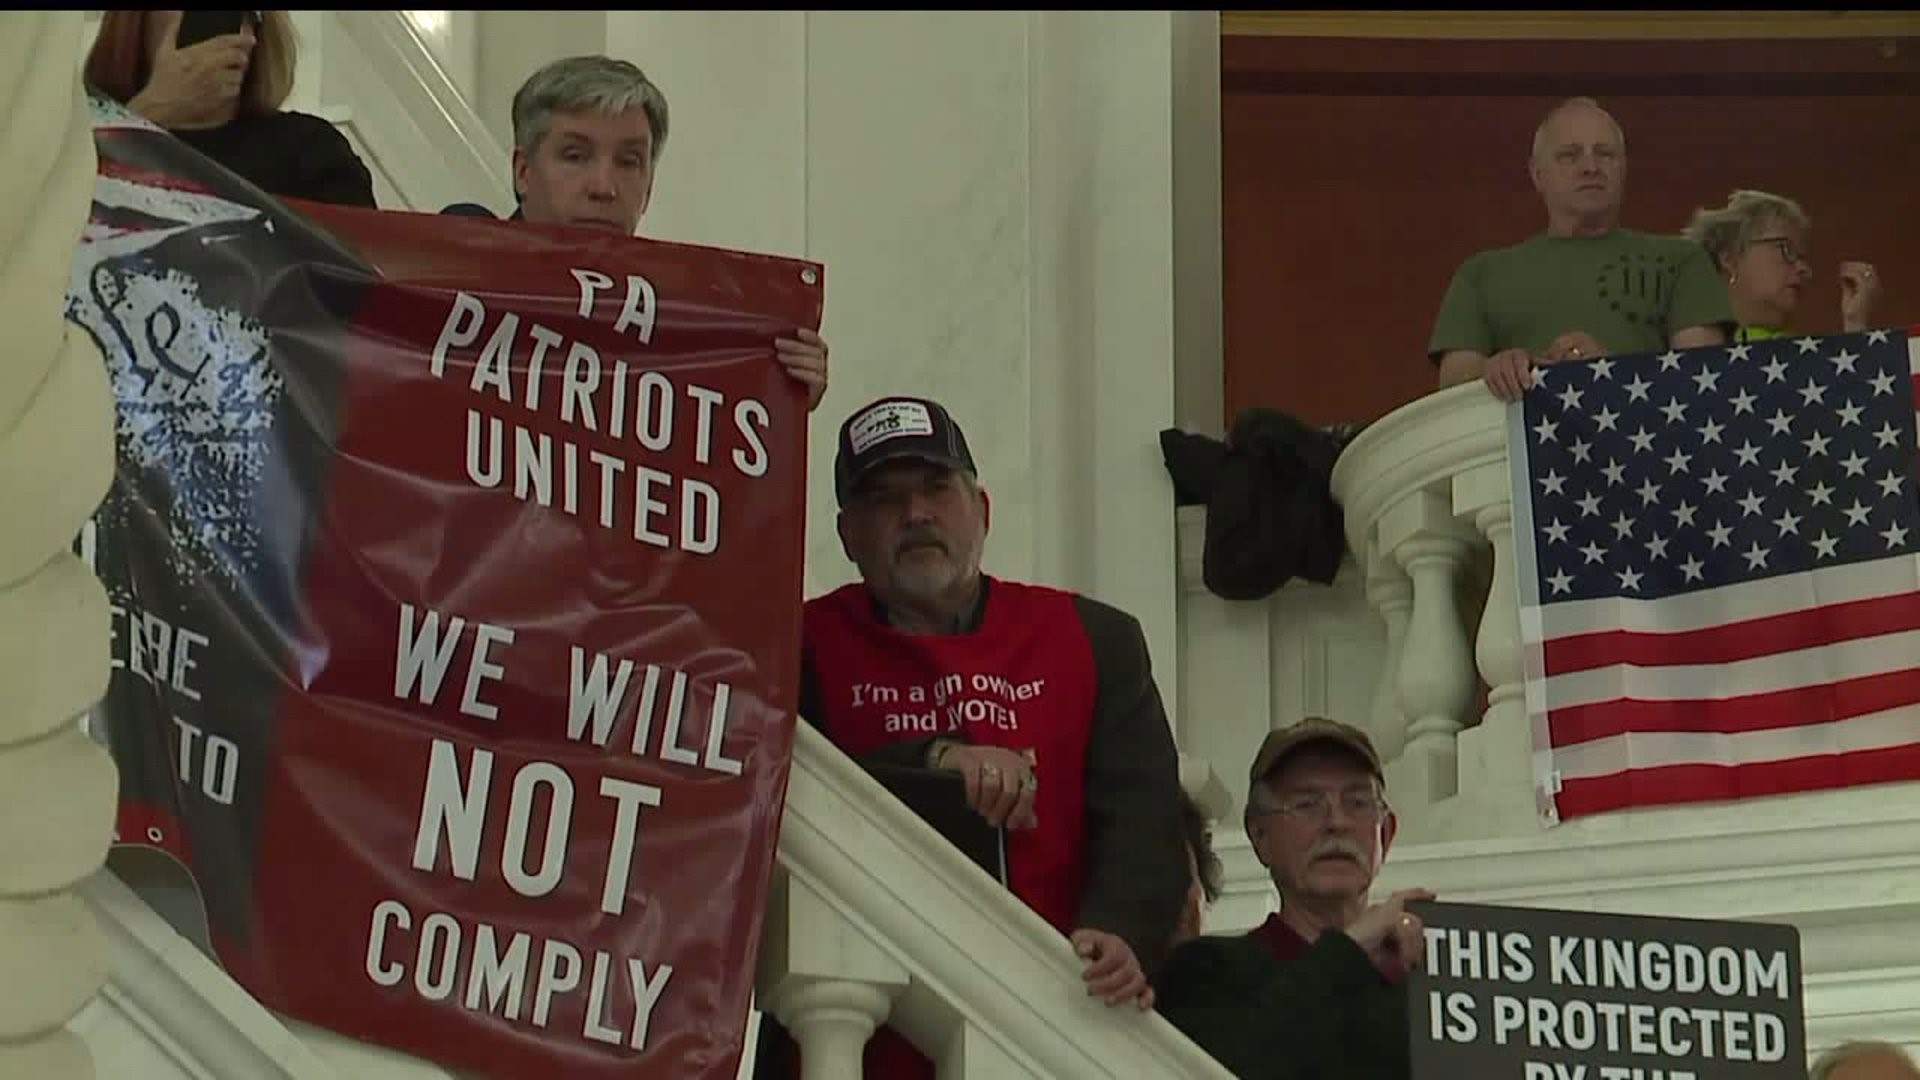 Rally to protect 2nd Amendment held at state capitol